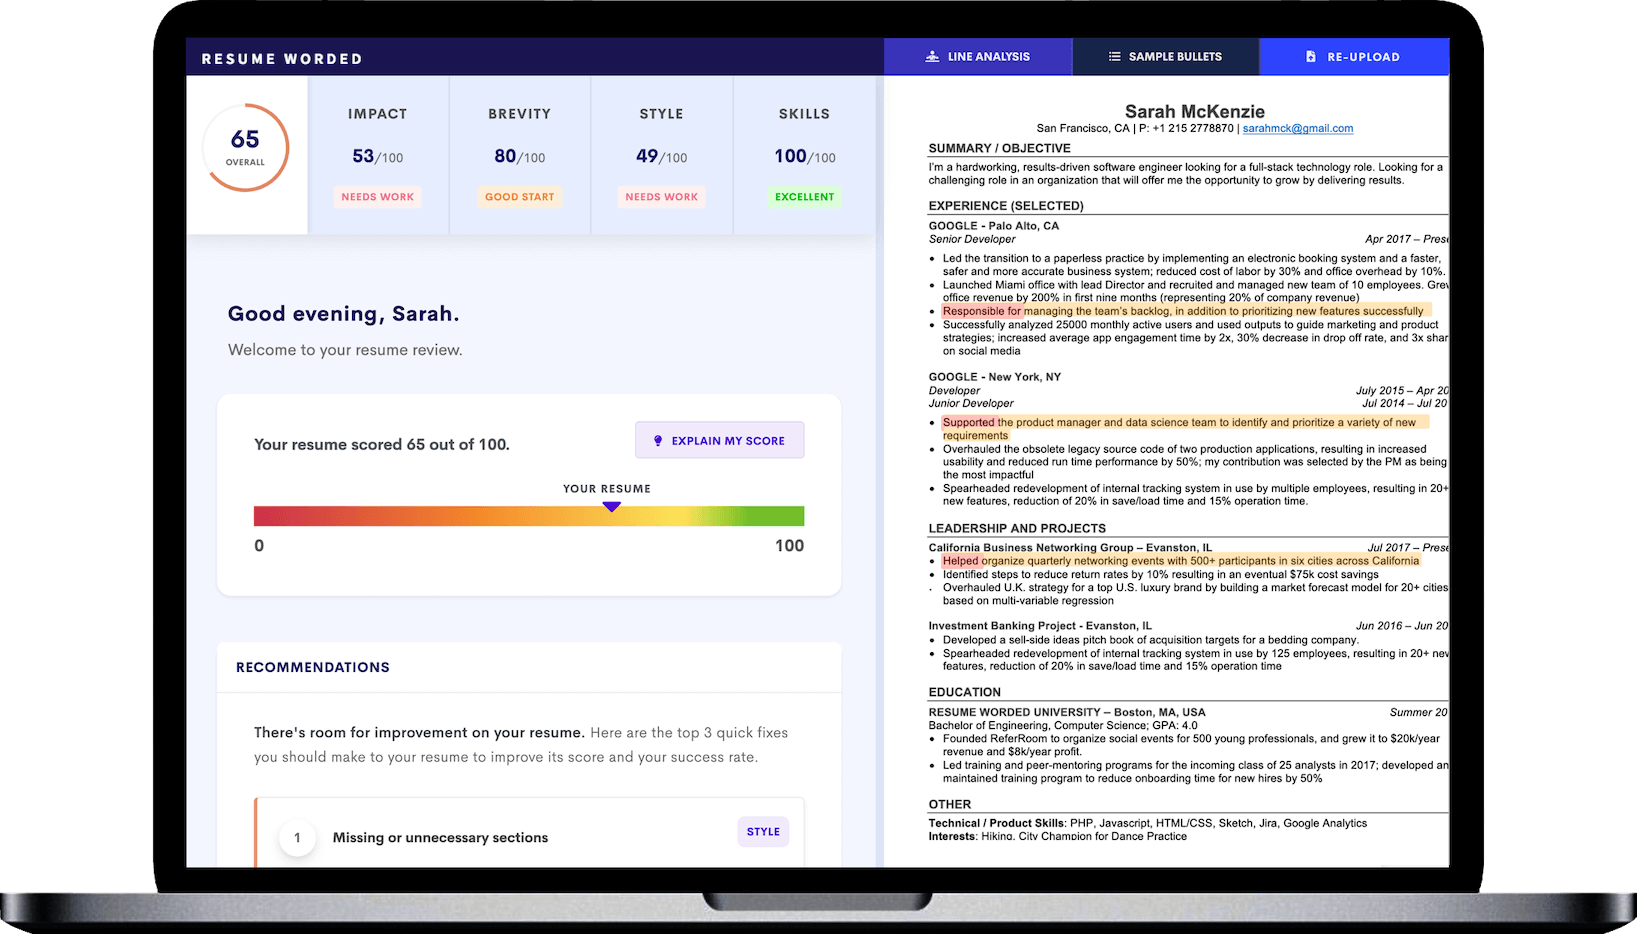 Resume Worded’s ‘Score My Resume’ tool offers expert feedback on your resume, instantly, for free